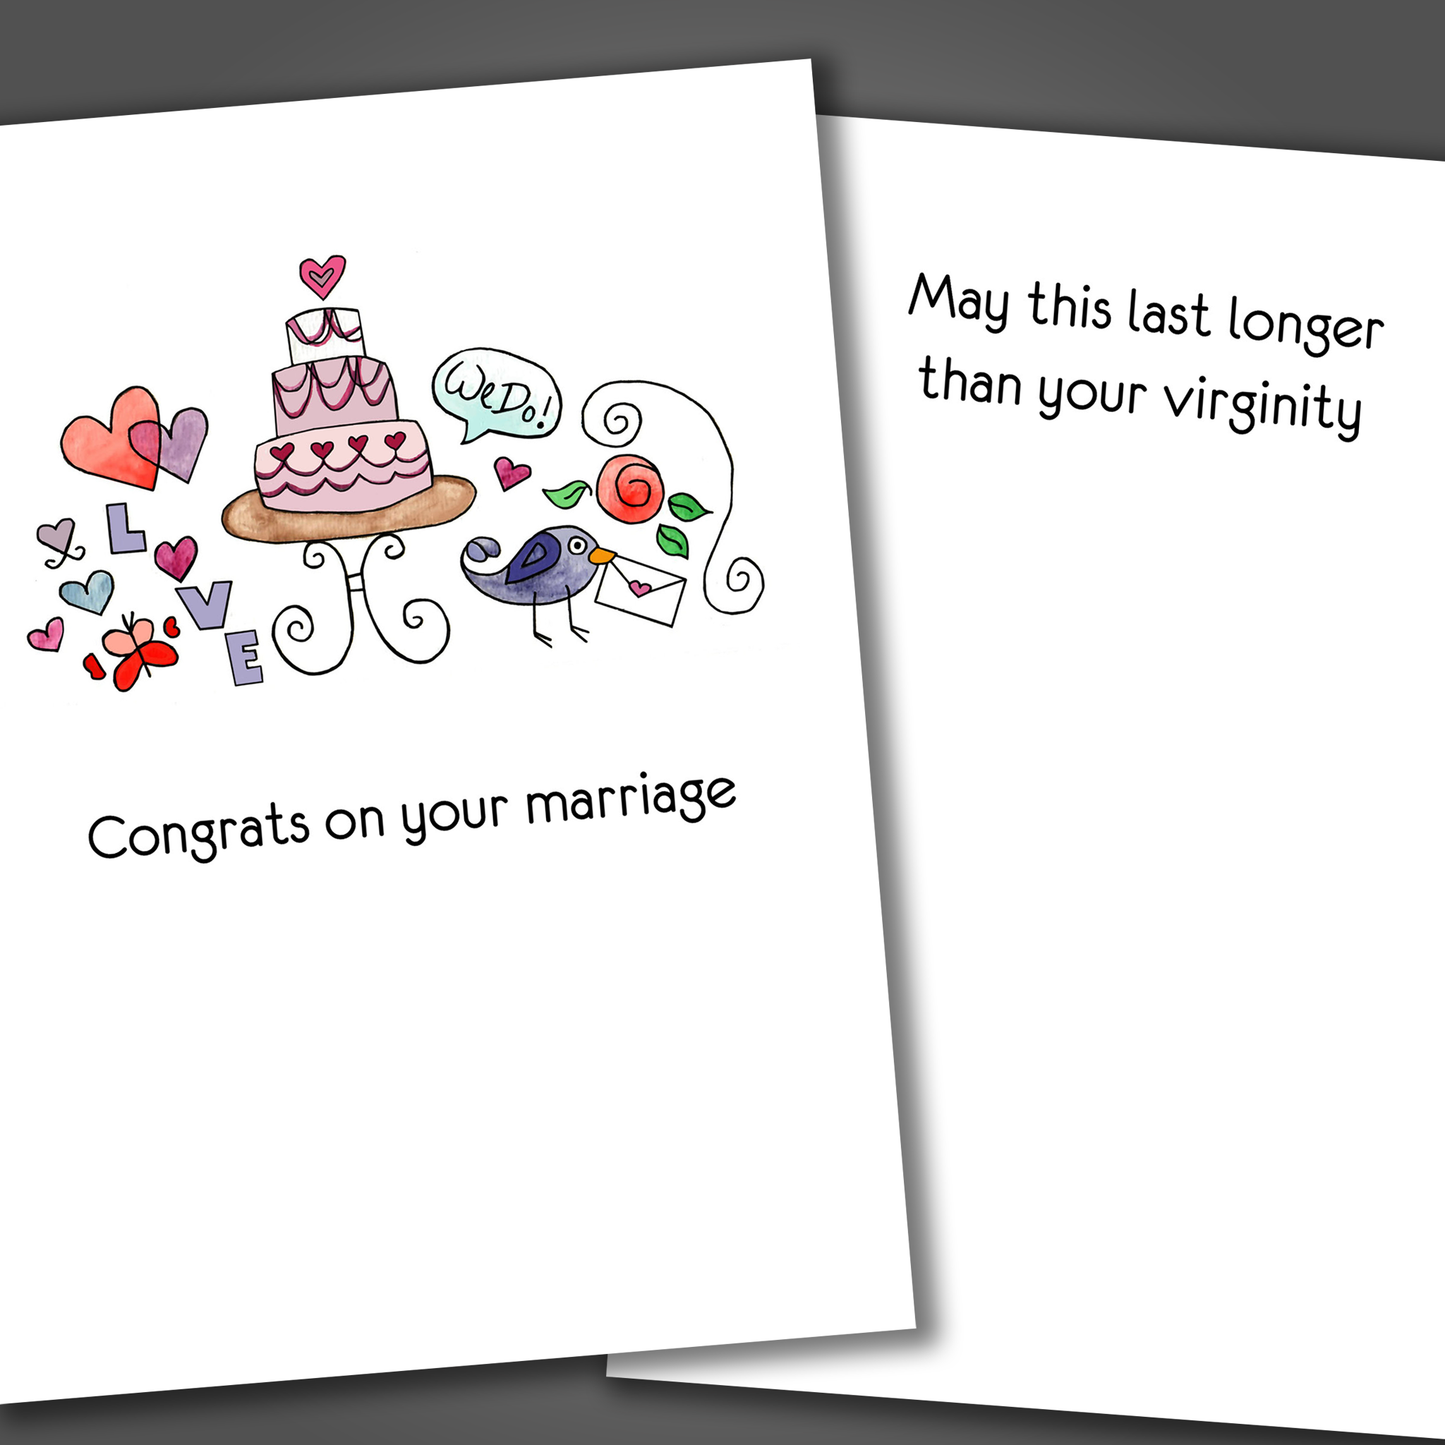 Funny wedding card with a wedding cake and the word love drawn on the front of the card. Inside the card is a funny joke that says may this last longer than your virginity.